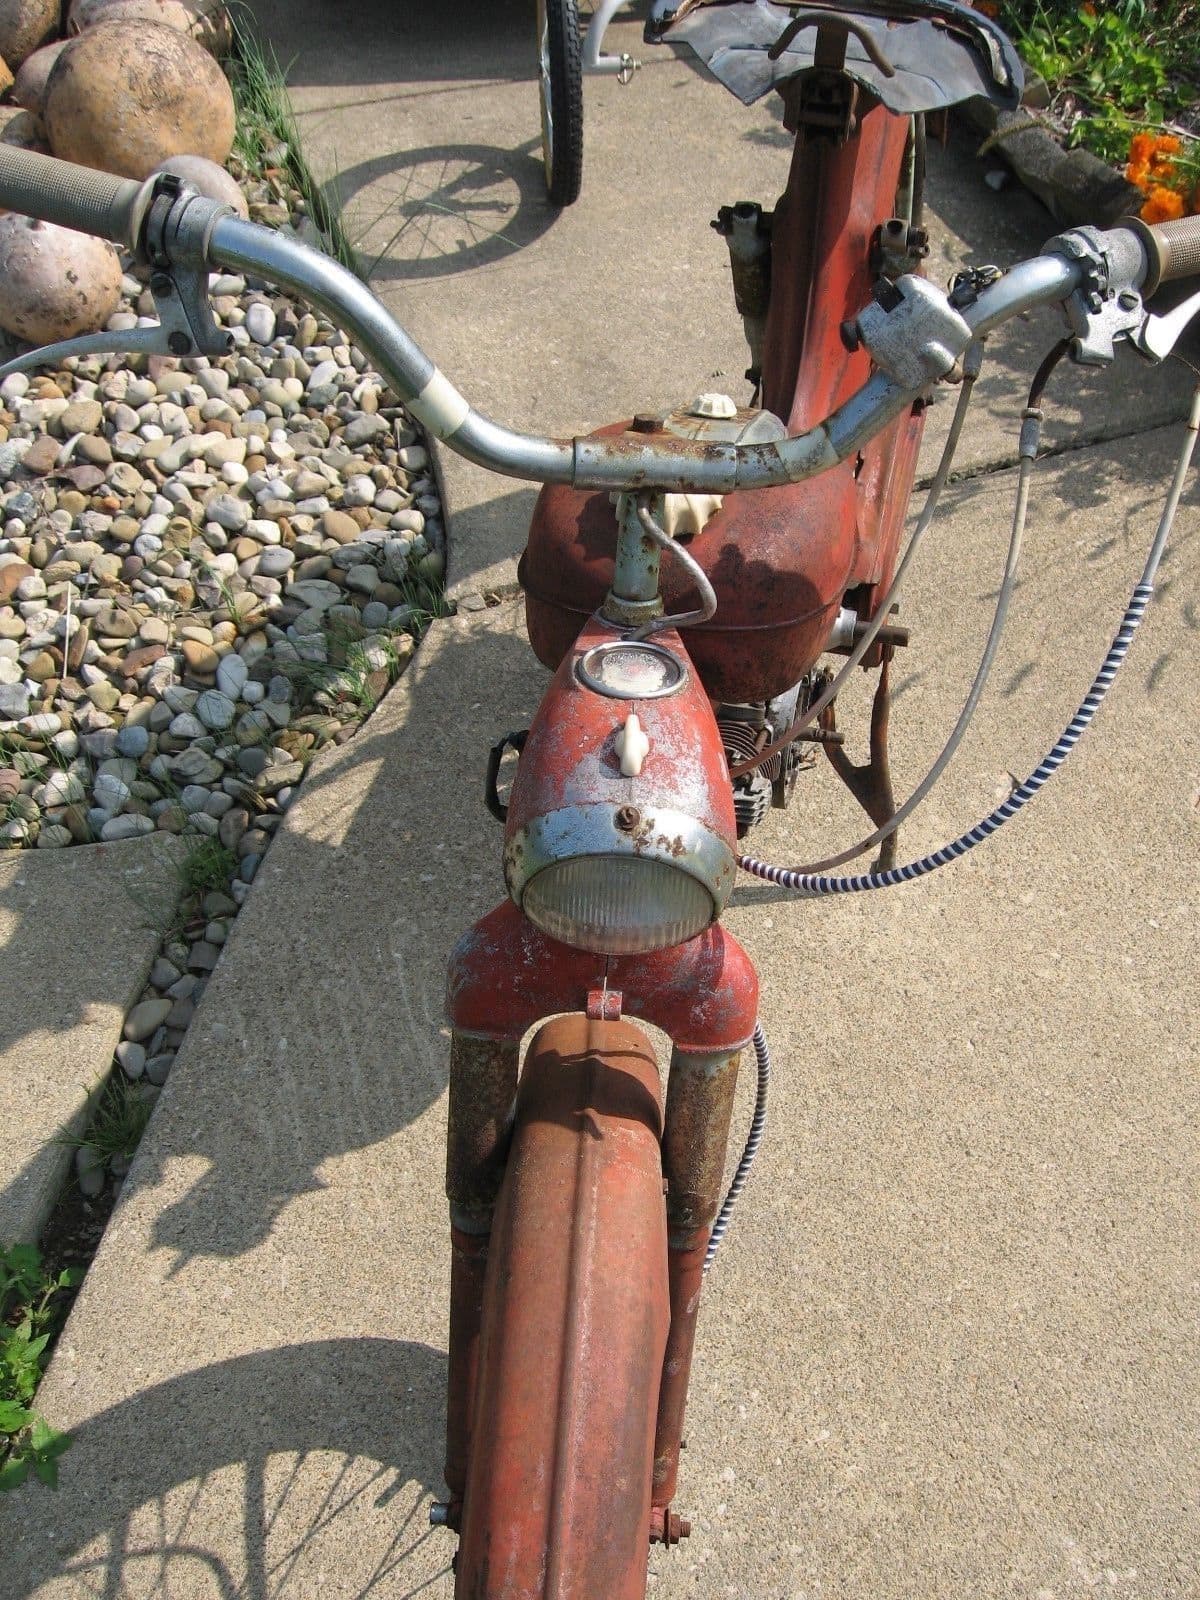 810.94001 Allstate Mo-Ped Puch